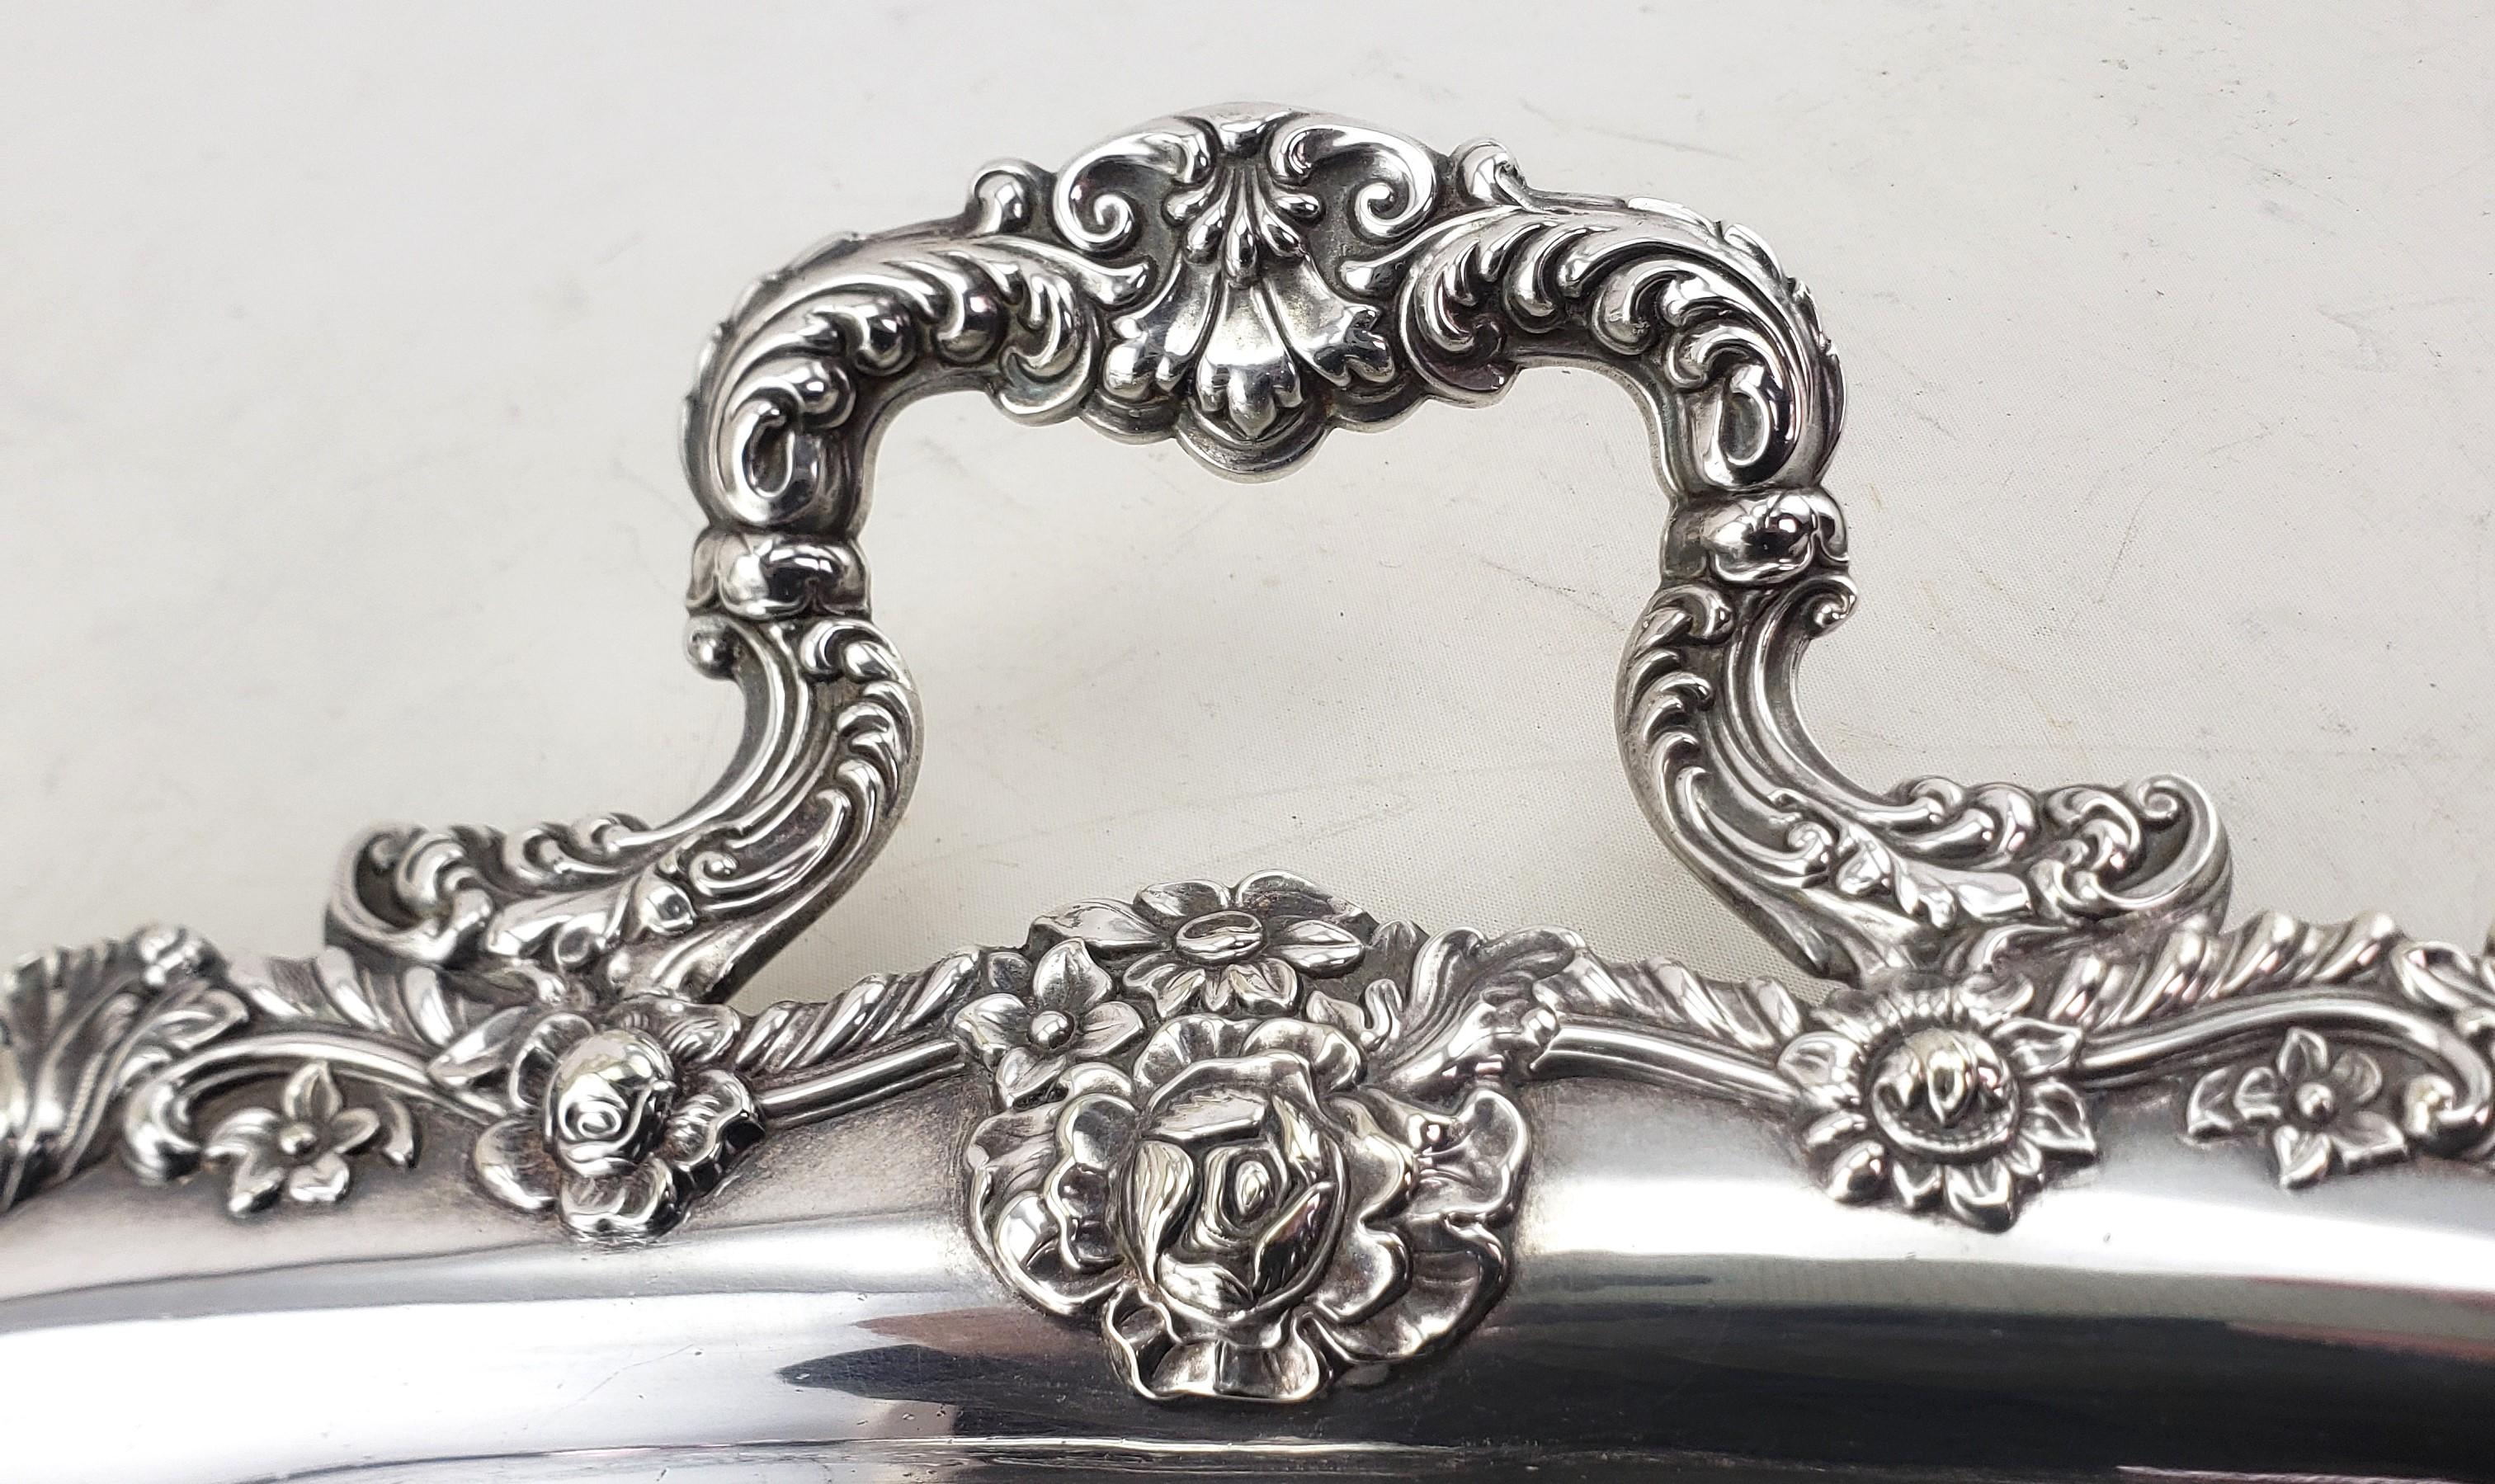 Large Antique English Silver Plated Serving Tray with Ornate Floral Decoration For Sale 2